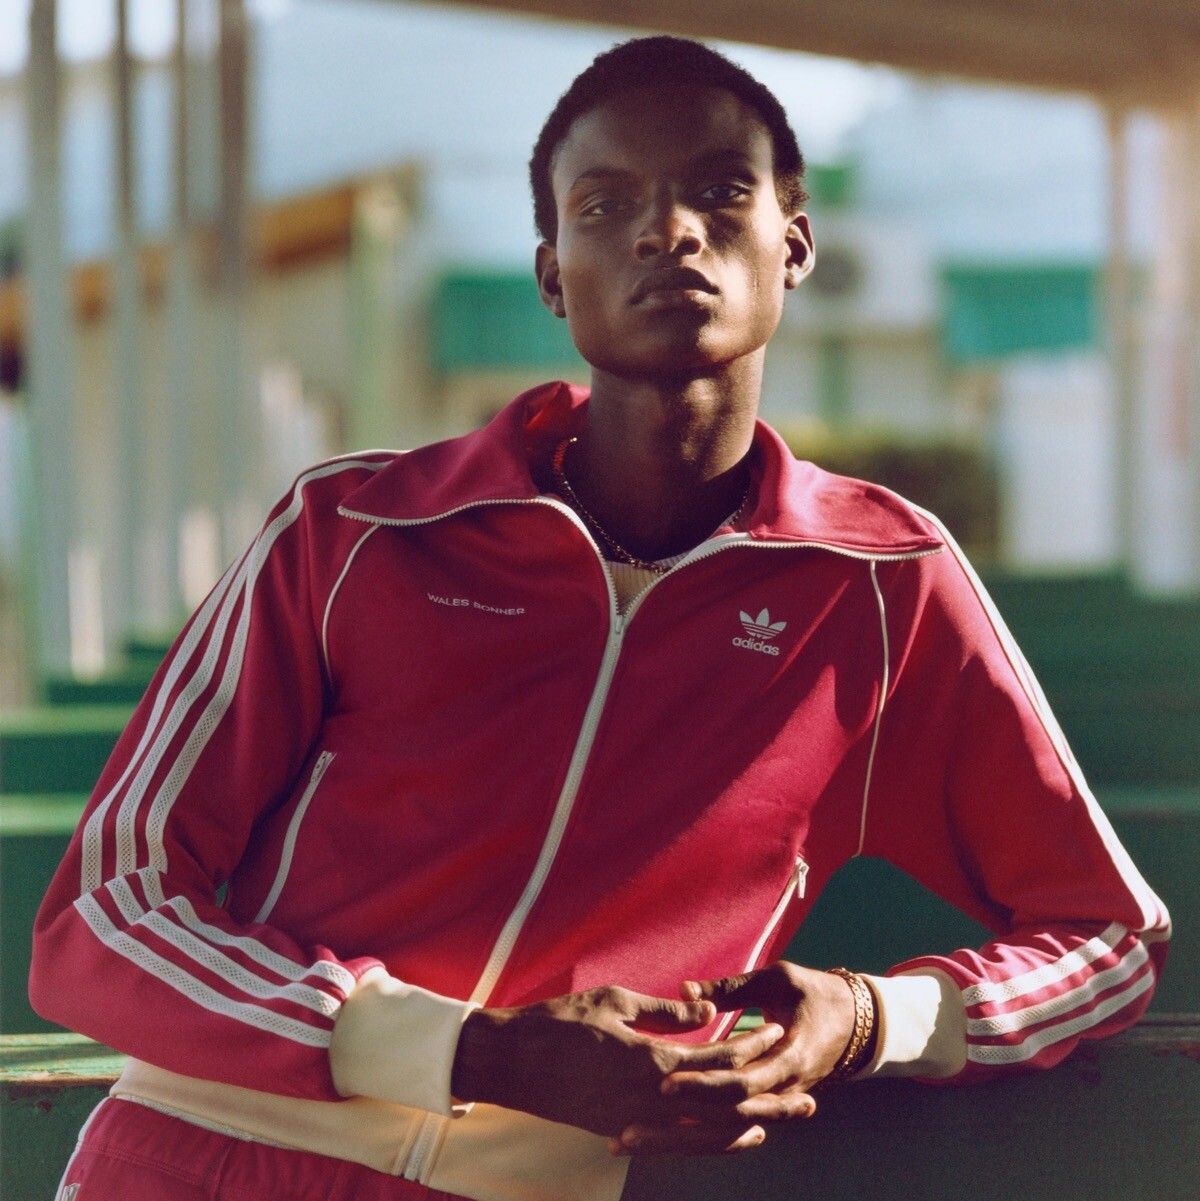 Wales Bonner x adidas Lovers Tracktop Red / us M, L